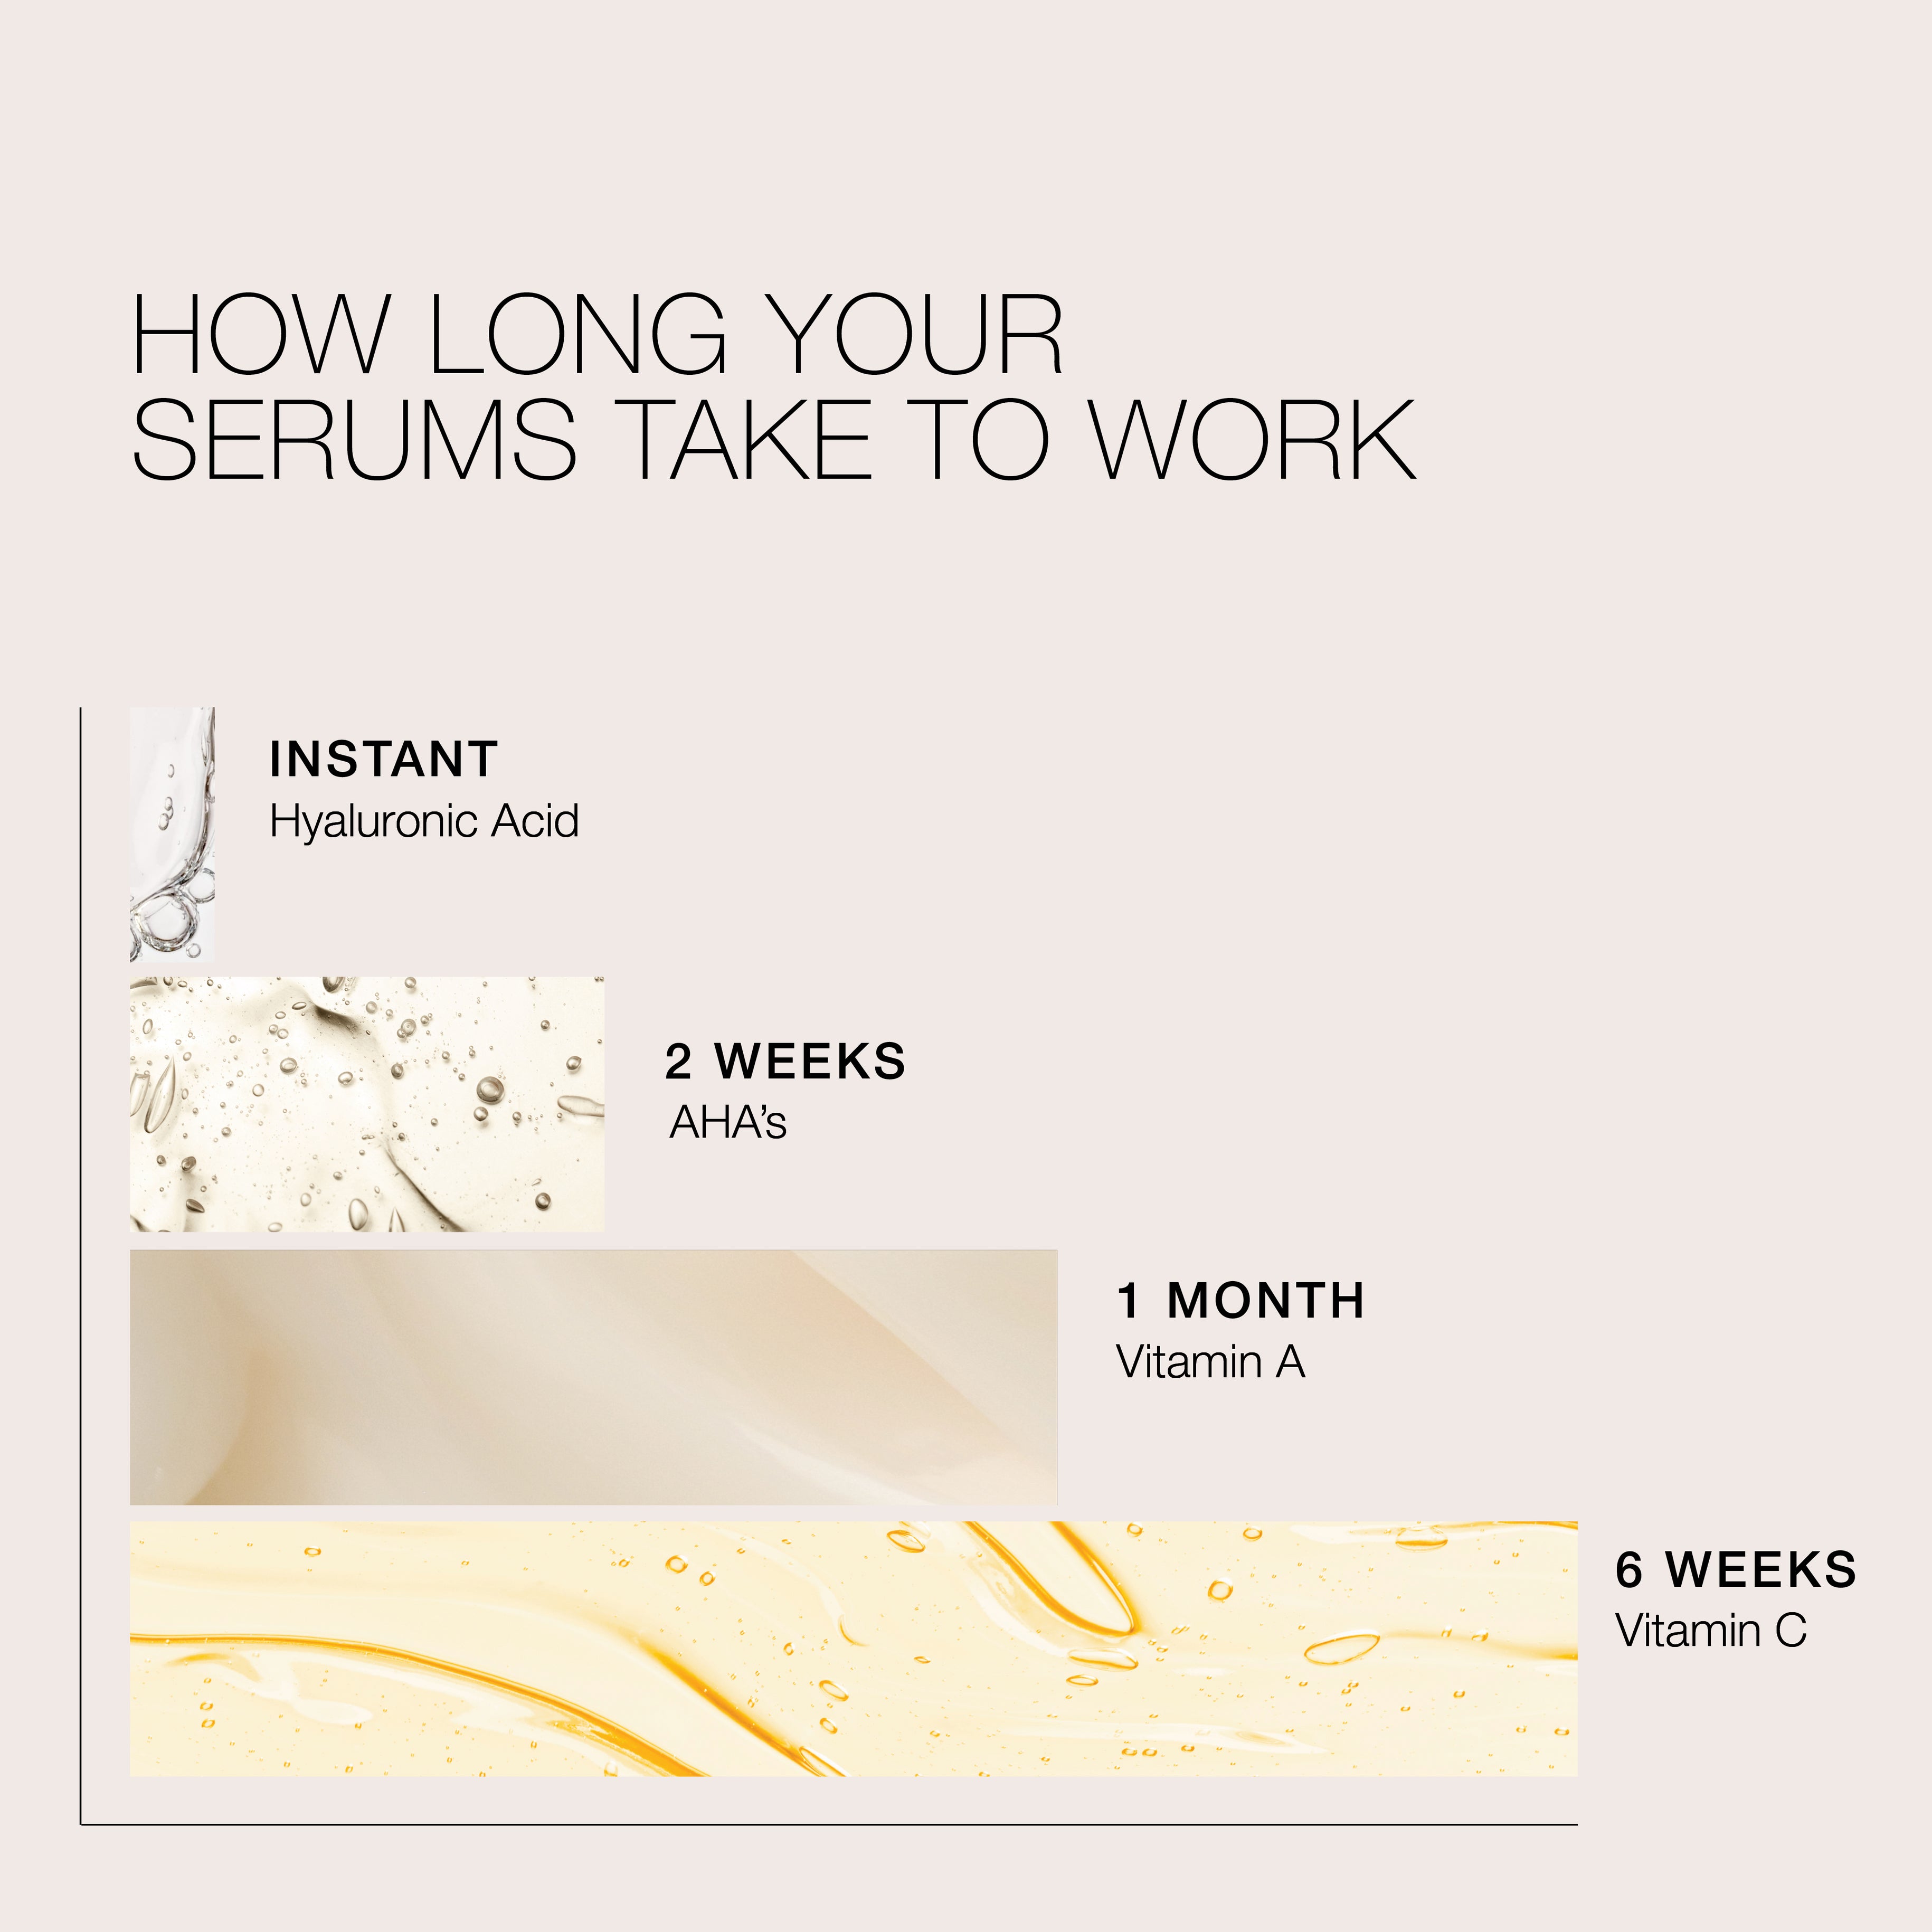 How long your serums take to work